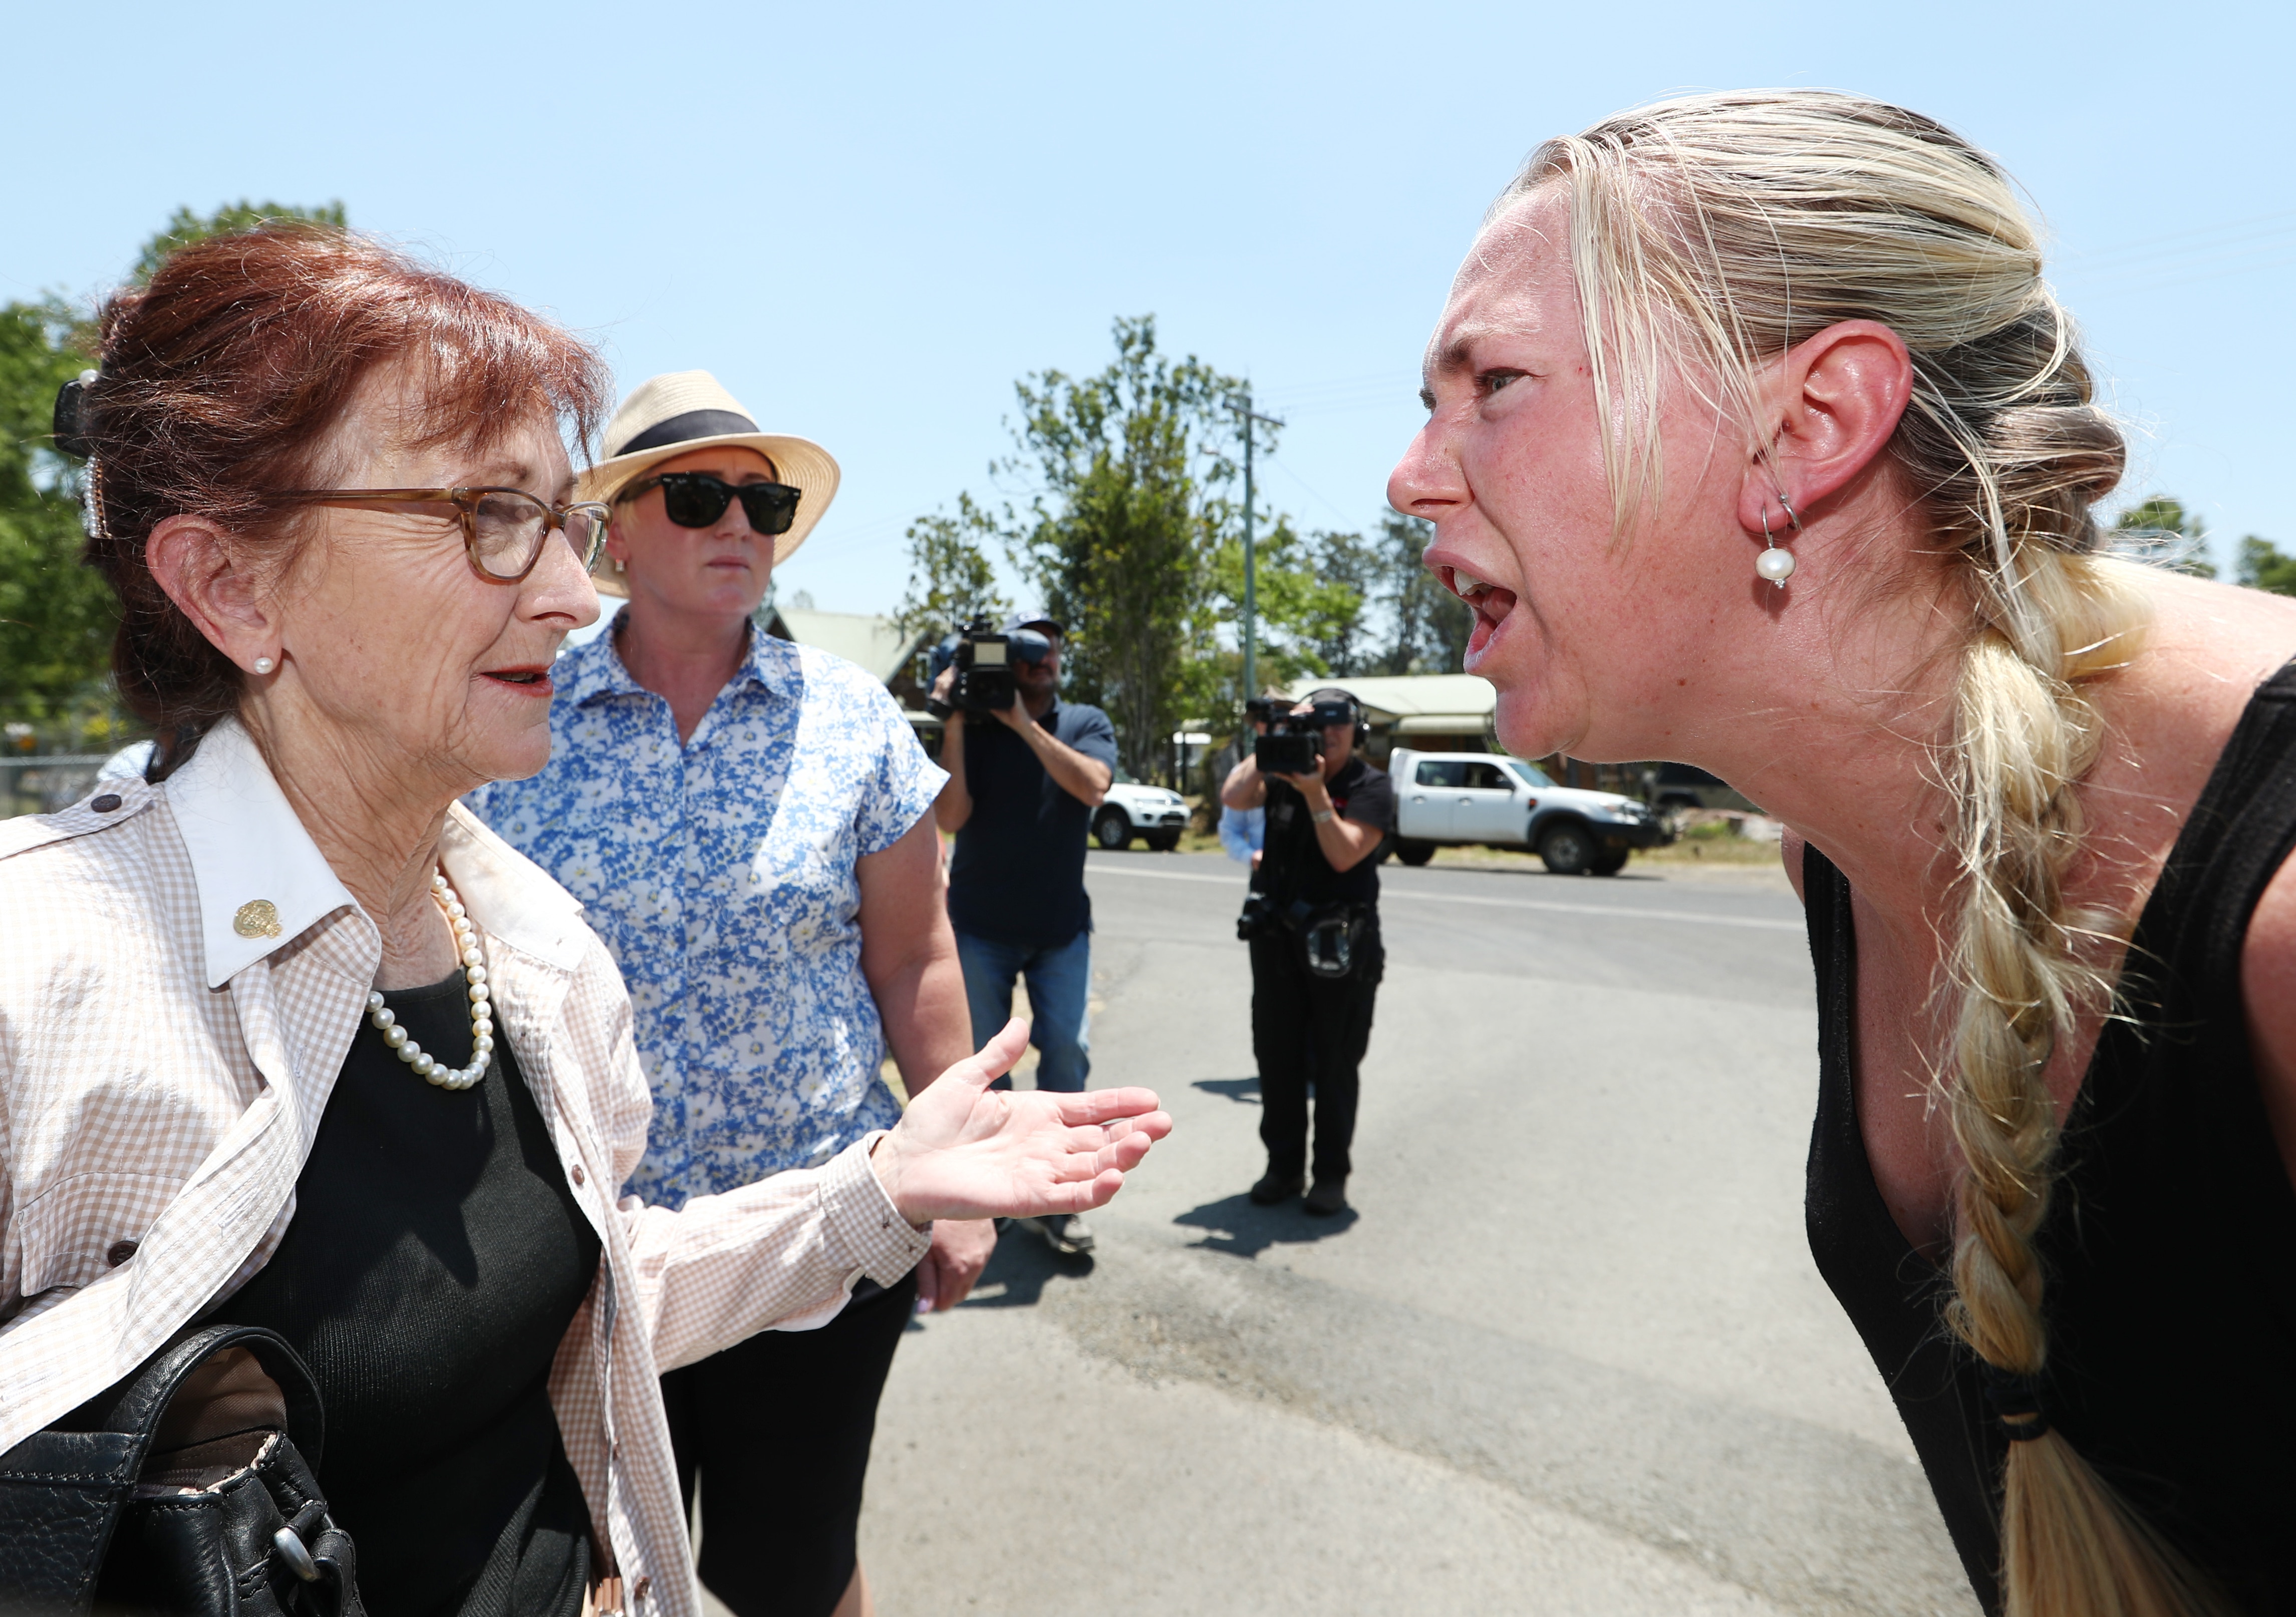 Local resident Ginger O'Brien shouts at Lismore MP Janelle Saffin.